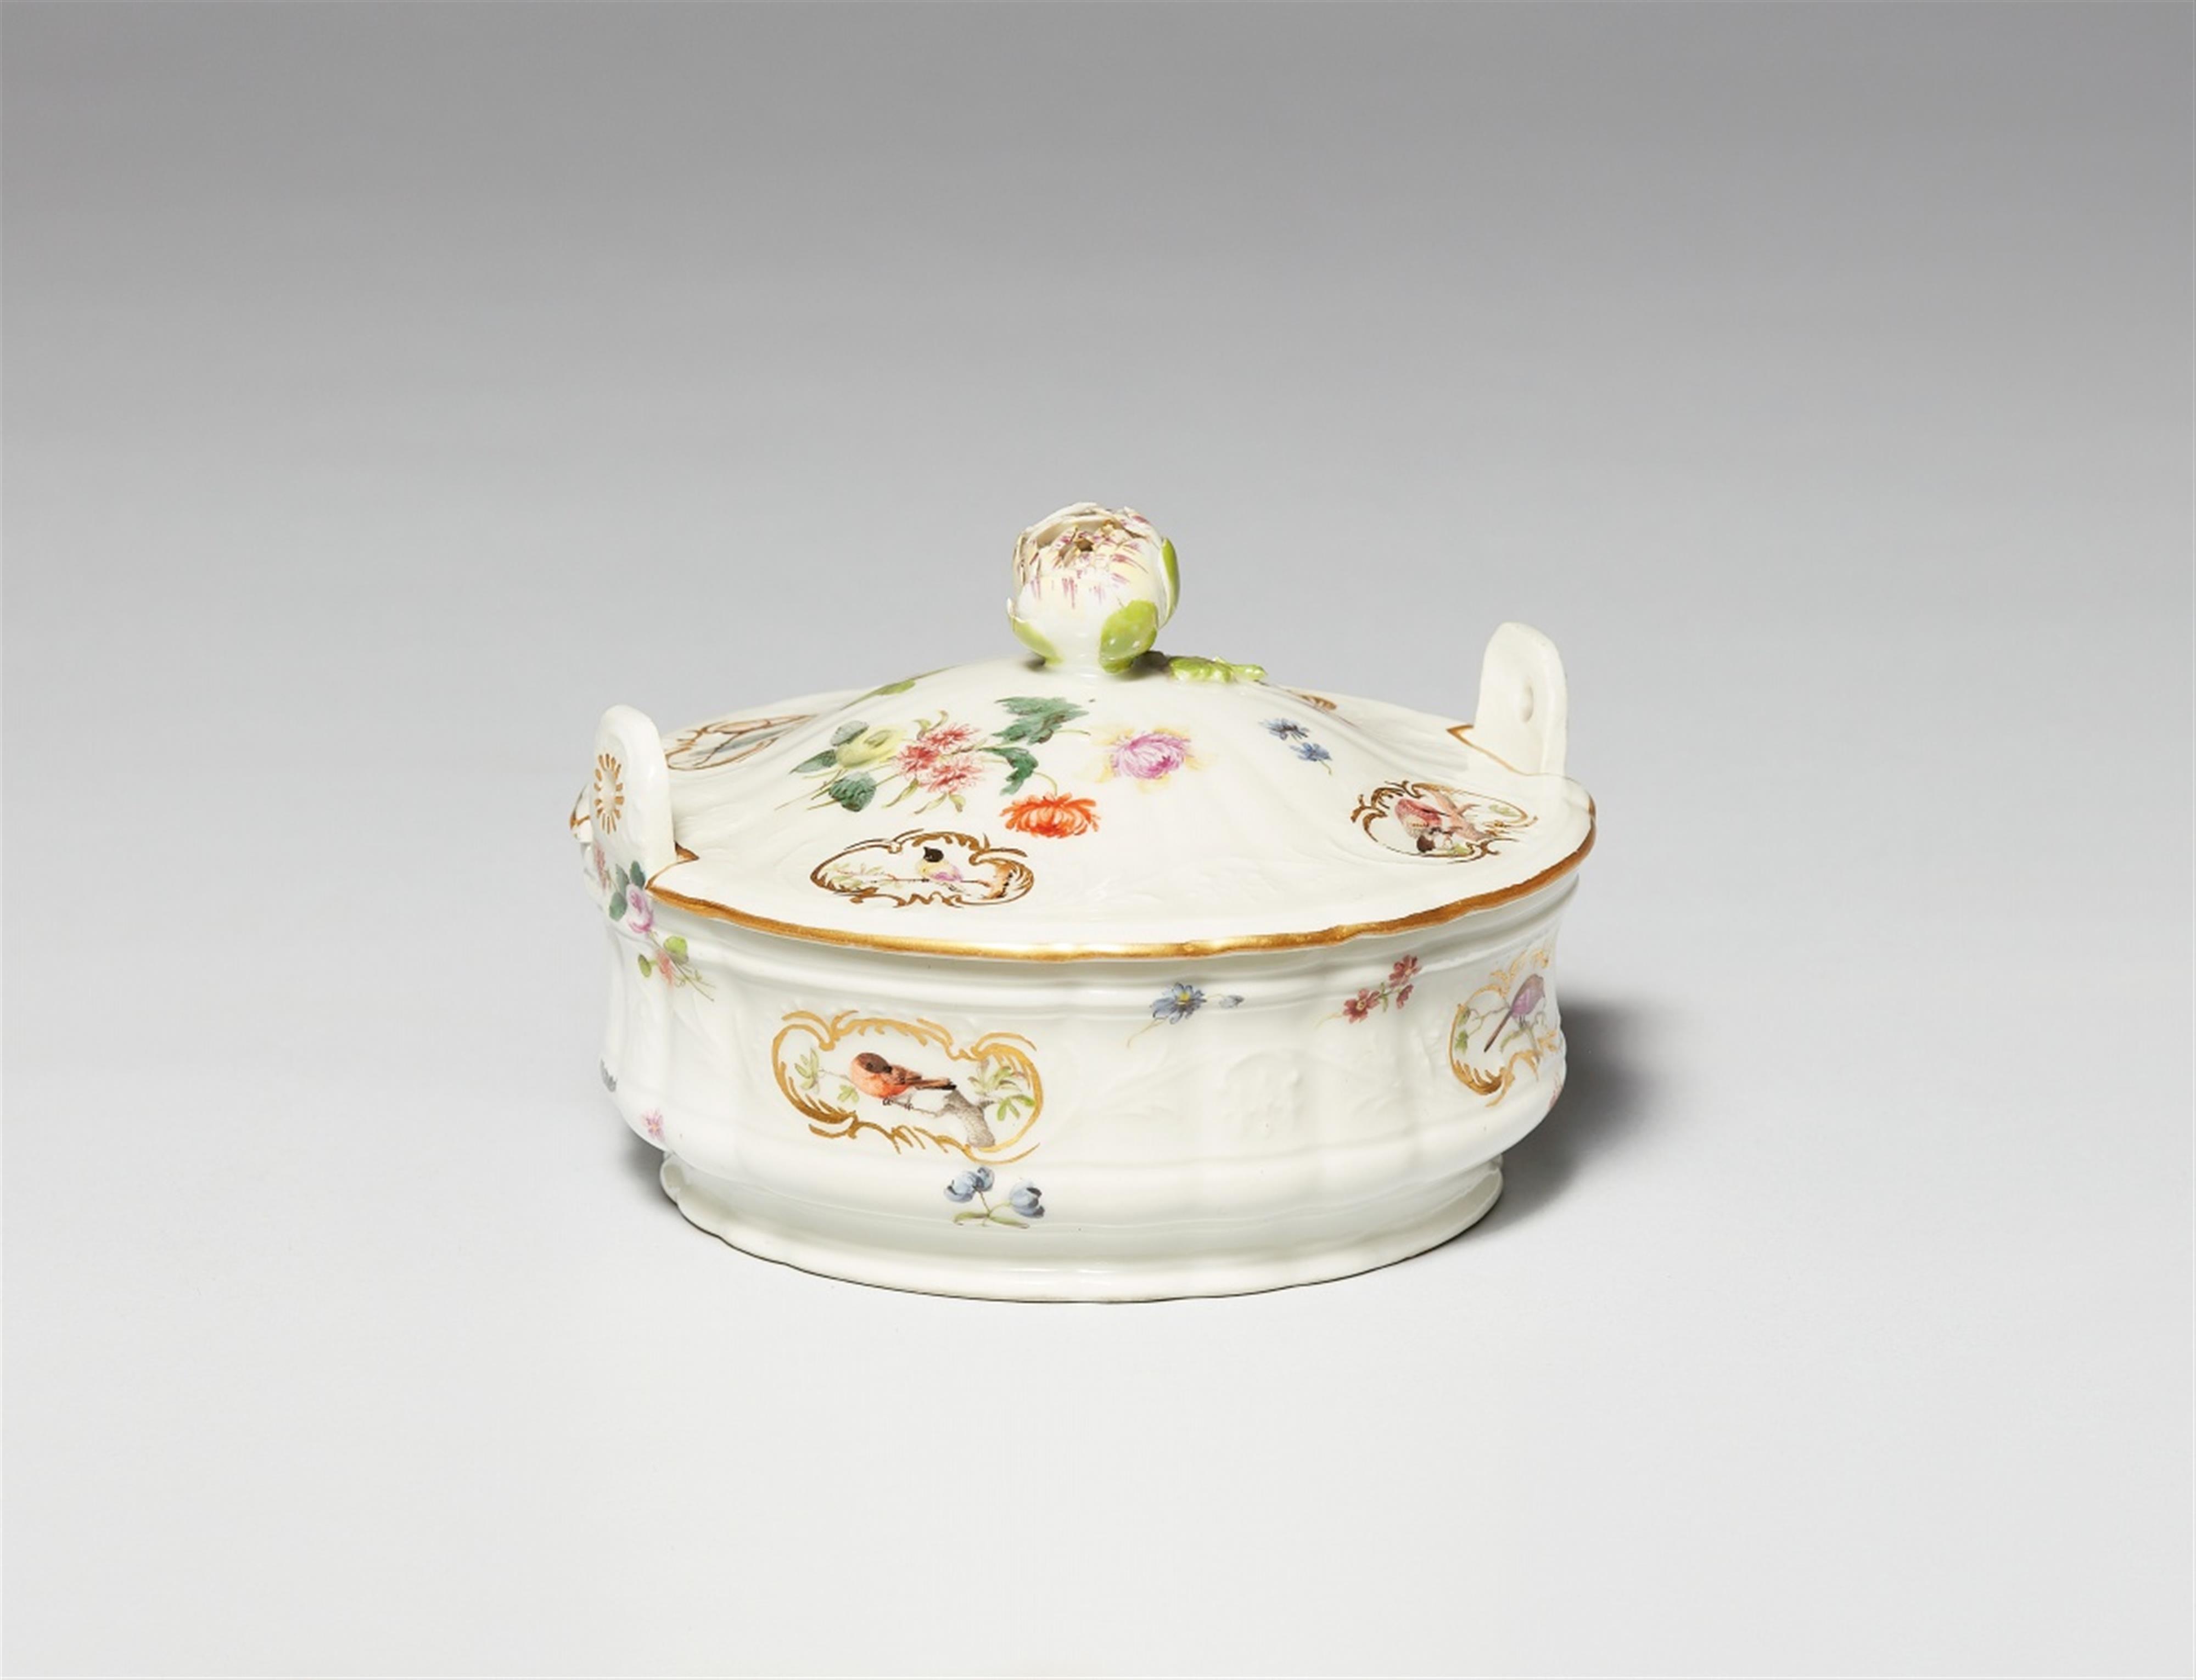 A rare Meissen porcelain butter dish with birds - image-1